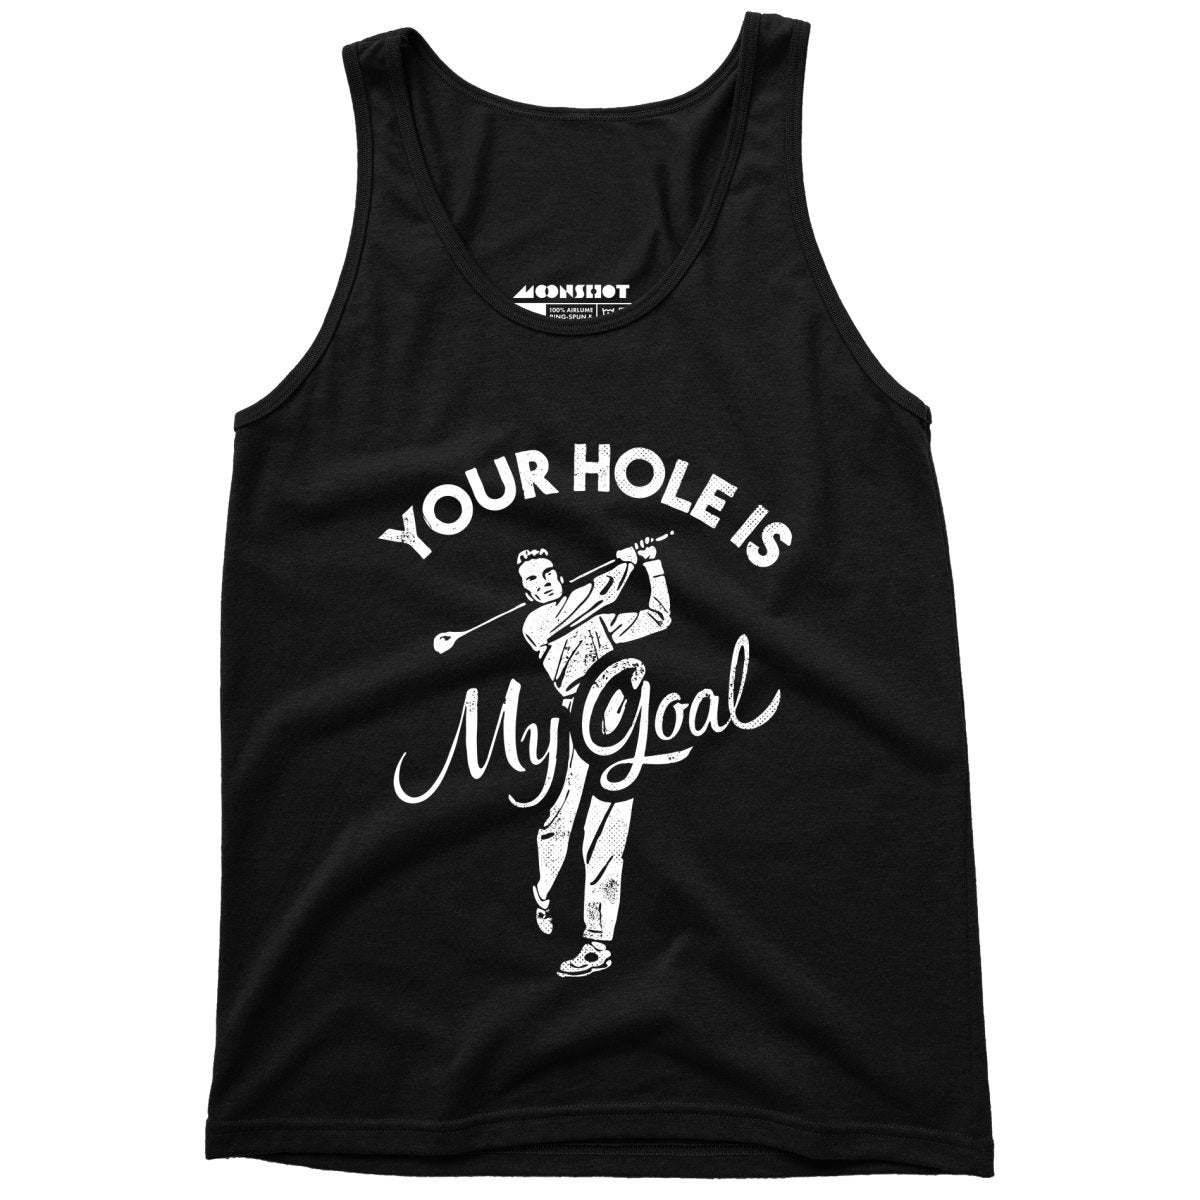 Your Hole is My Goal - Golf - Unisex Tank Top